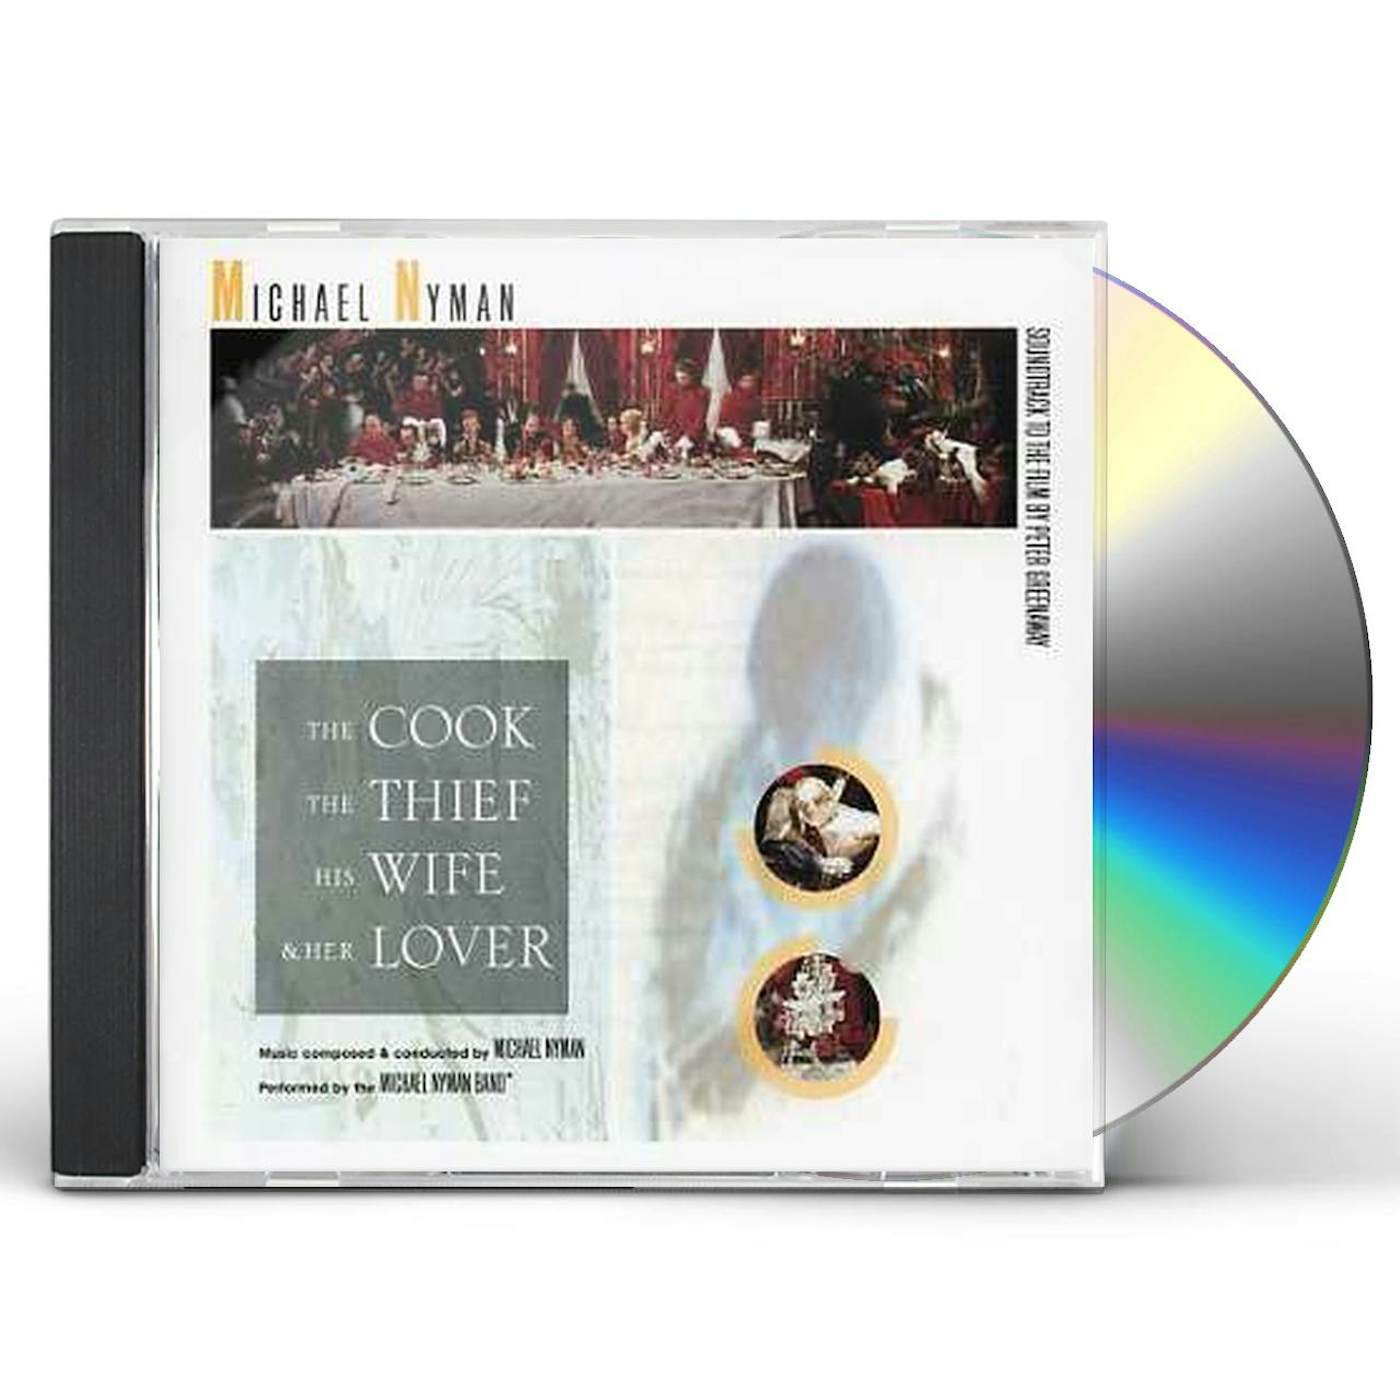 Michael Nyman COOK THE THIEF HIS WIFE & HER LOVER CD